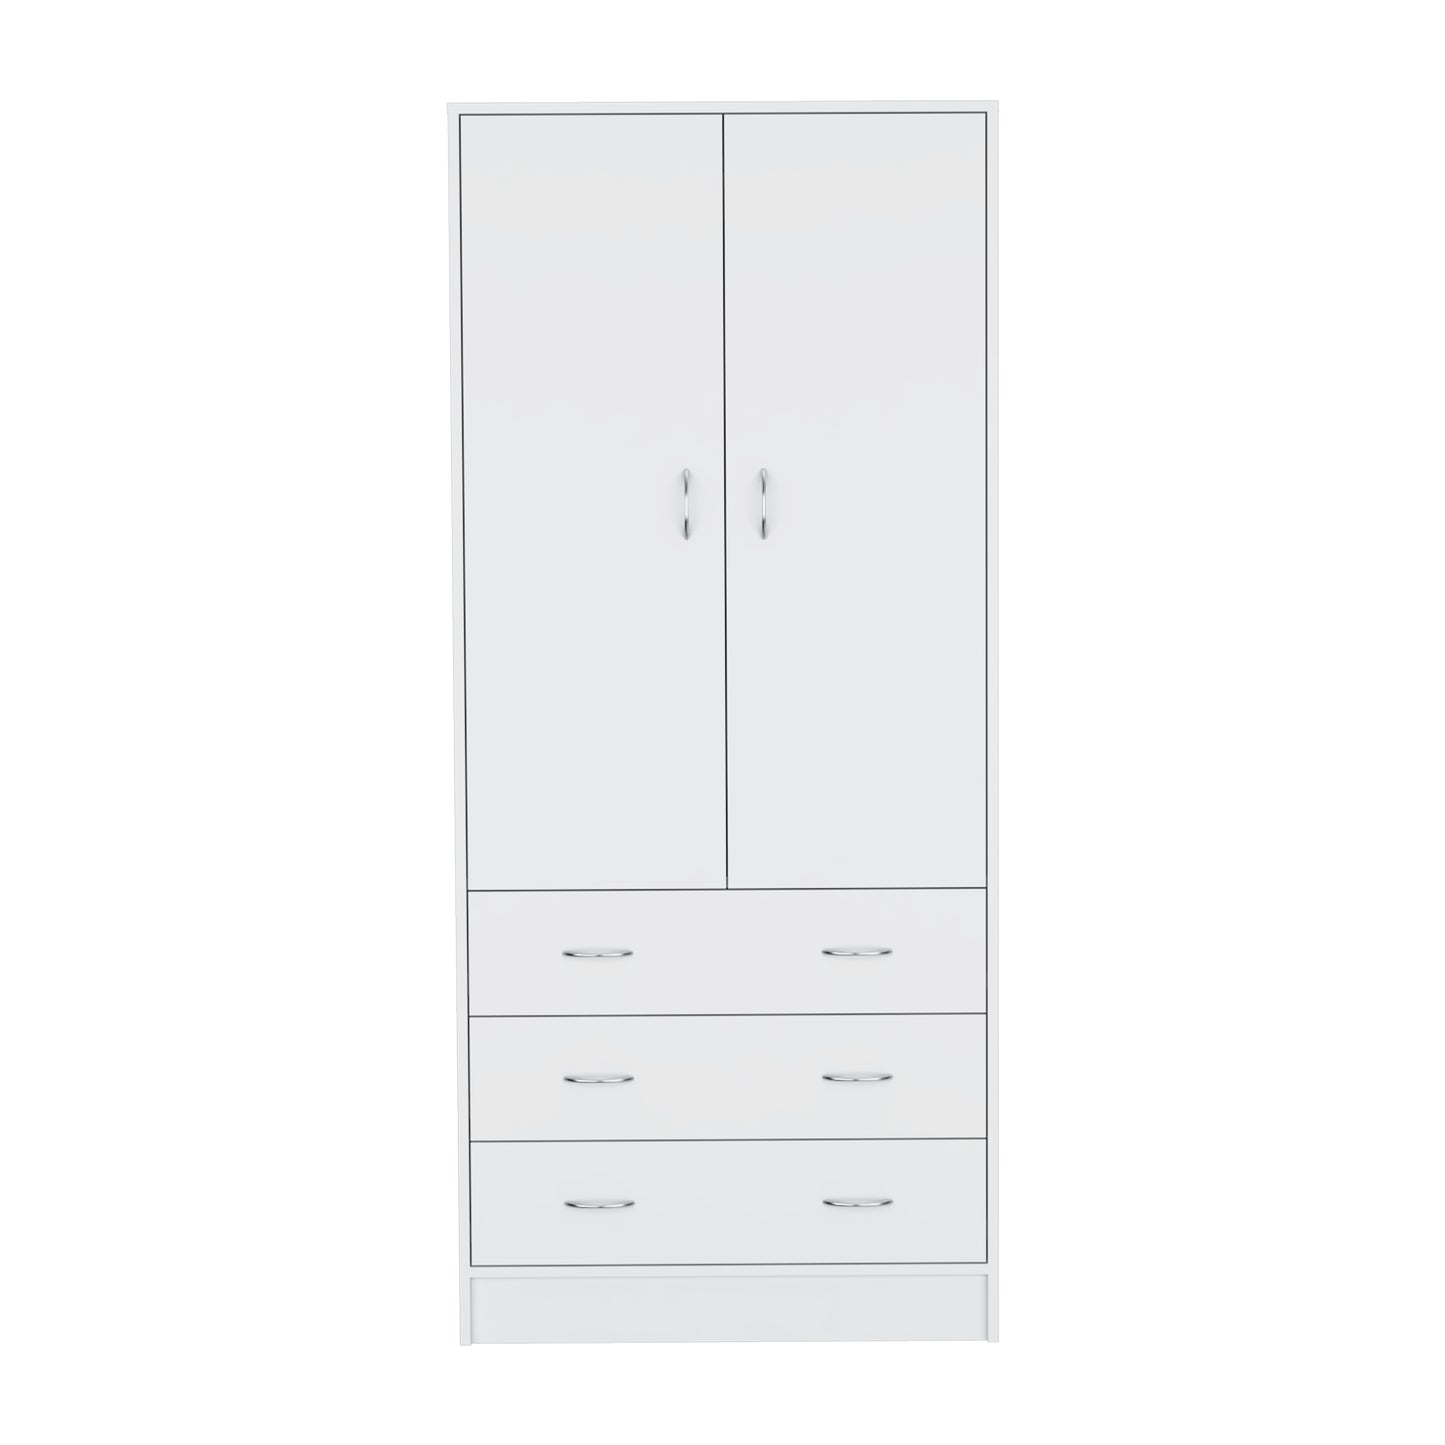 Taly 2 Doors 3 Drawers Armoire